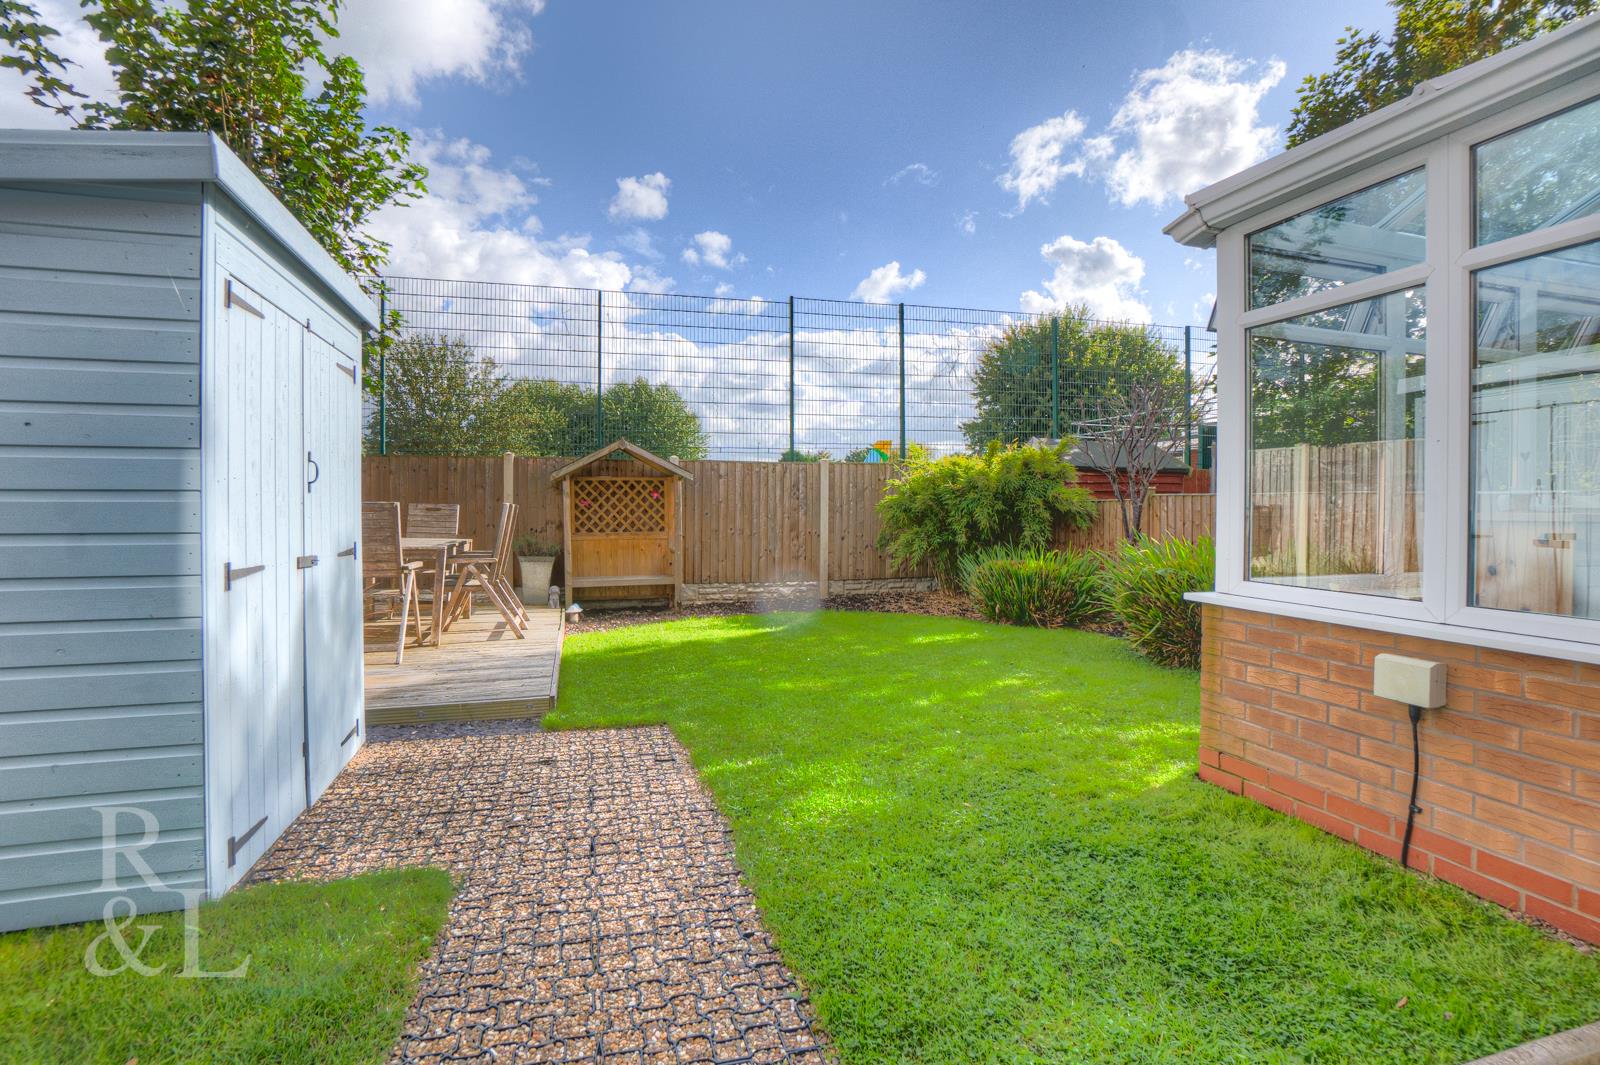 Property image for Hotspur Drive, Colwick, Nottingham